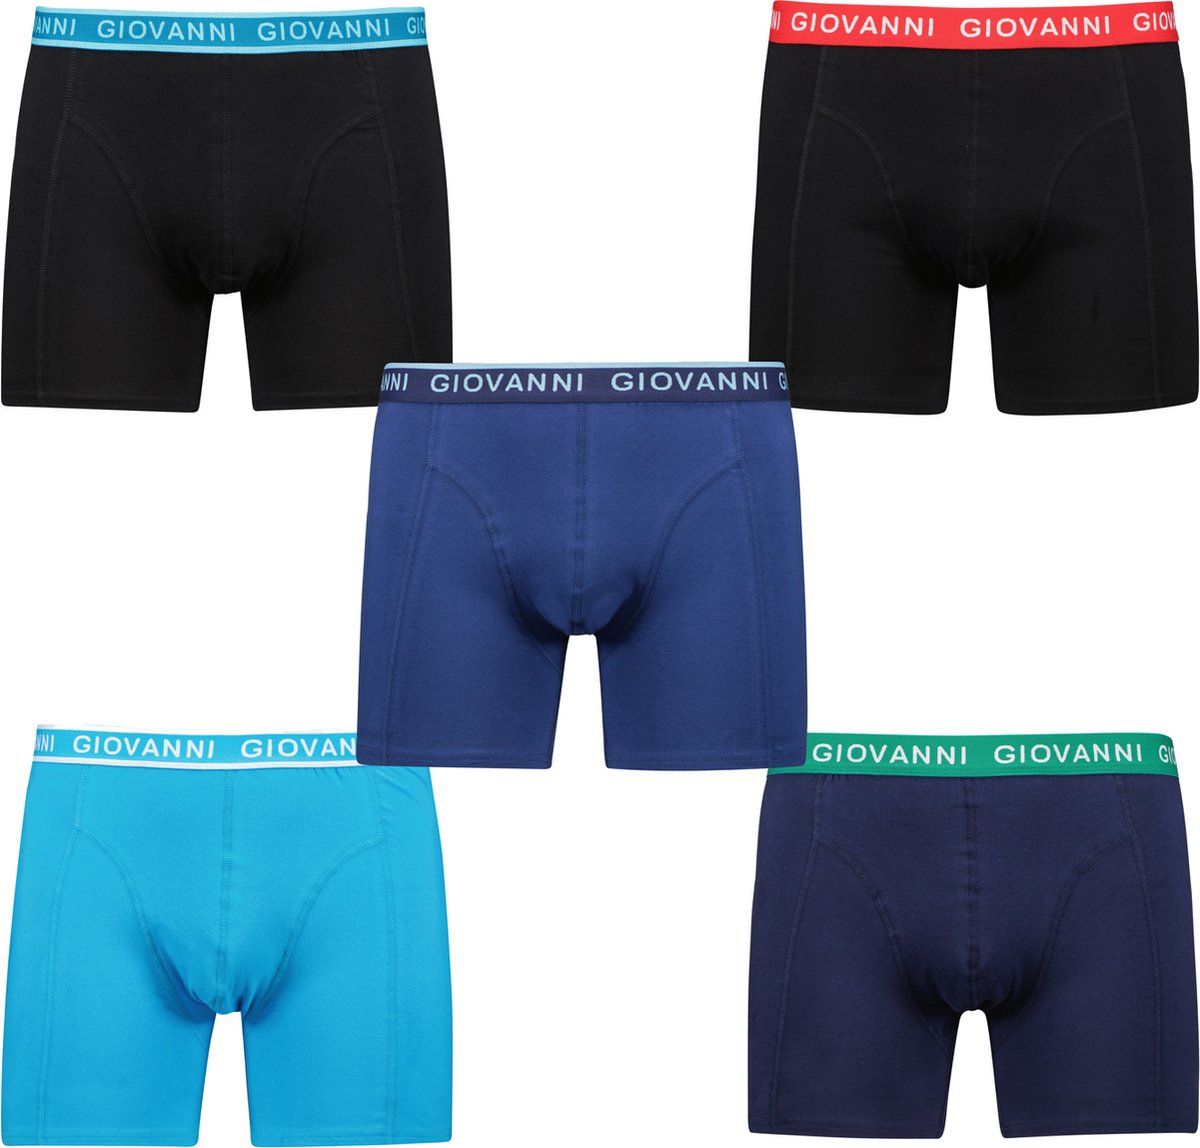 Giovanni Heren Boxershorts 5Pack Montreal M35A | Maat XXL